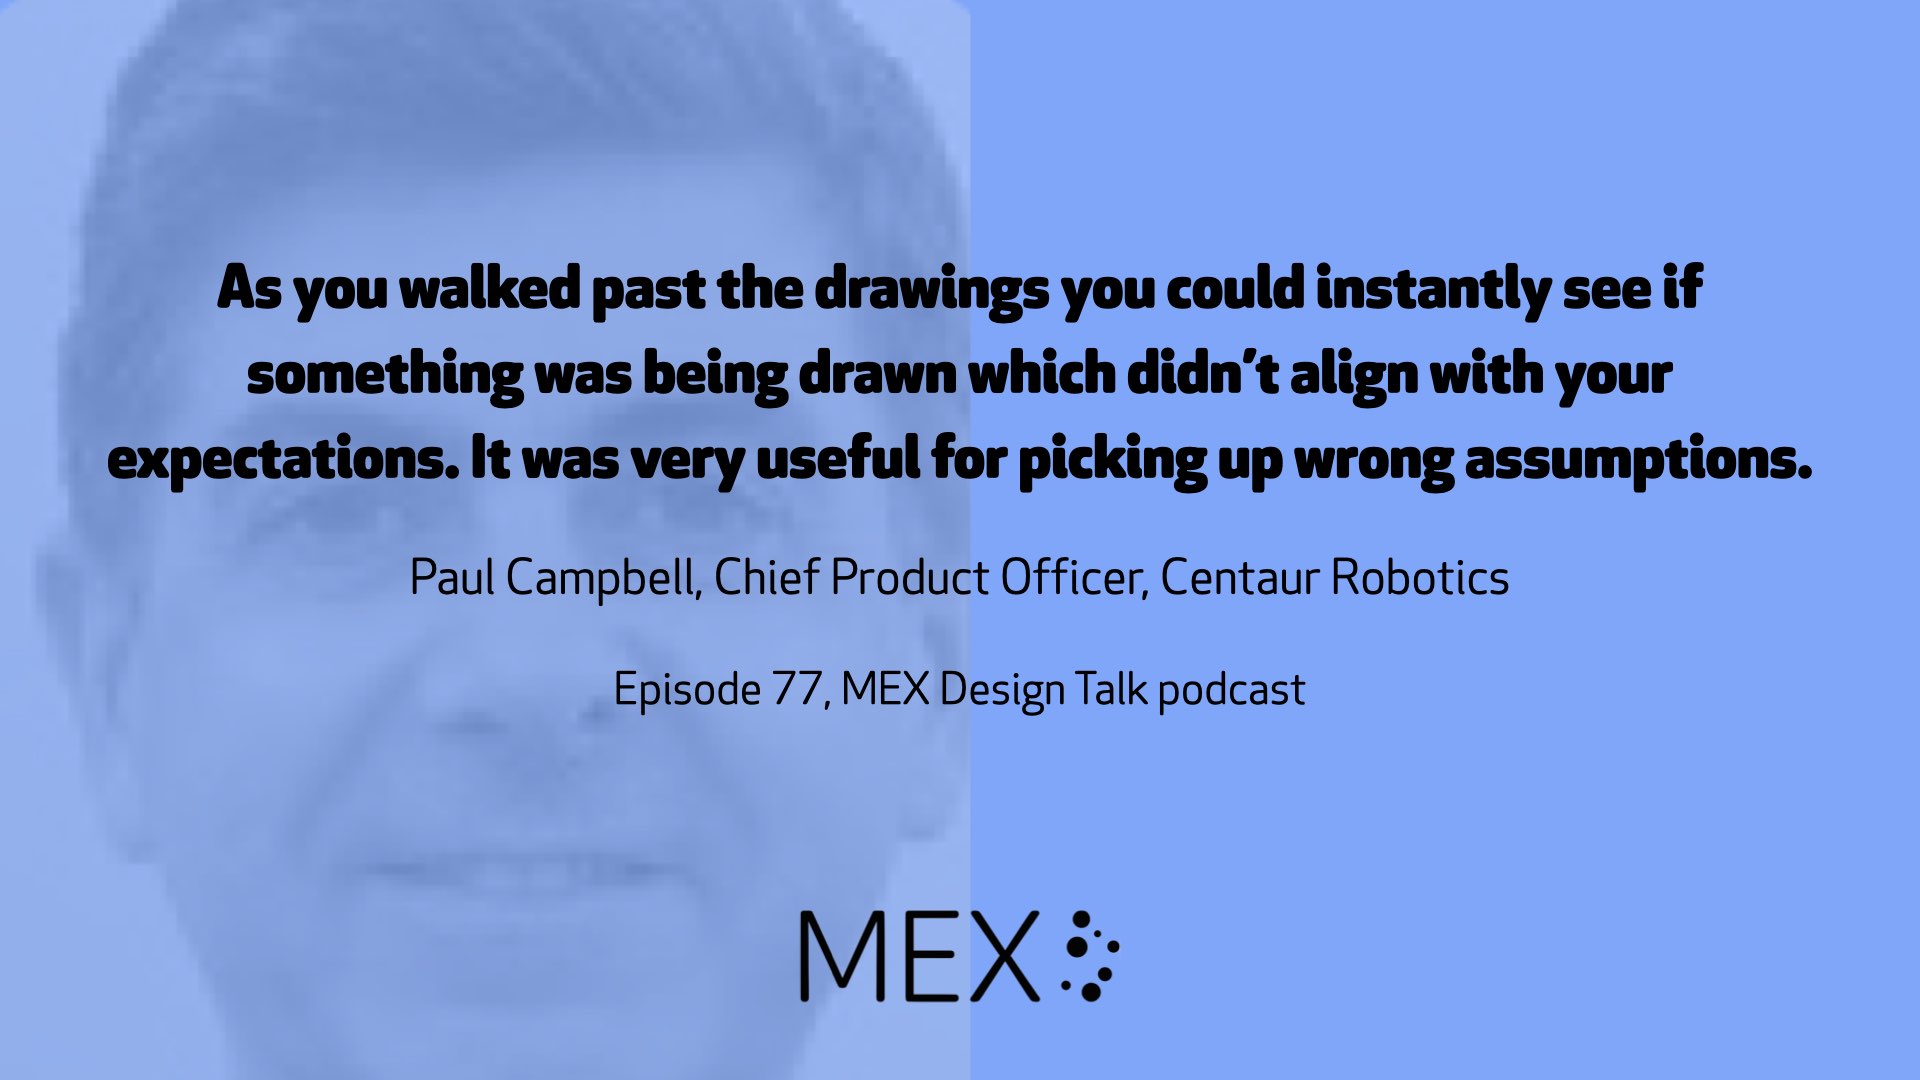 As you walked past the drawings you could instantly see if something was being drawn which didn’t align with your expectations. It was very useful for picking up wrong assumptions.  Paul Campbell, Chief Product Officer, Centaur Robotics  Episode 77, MEX Design Talk podcast